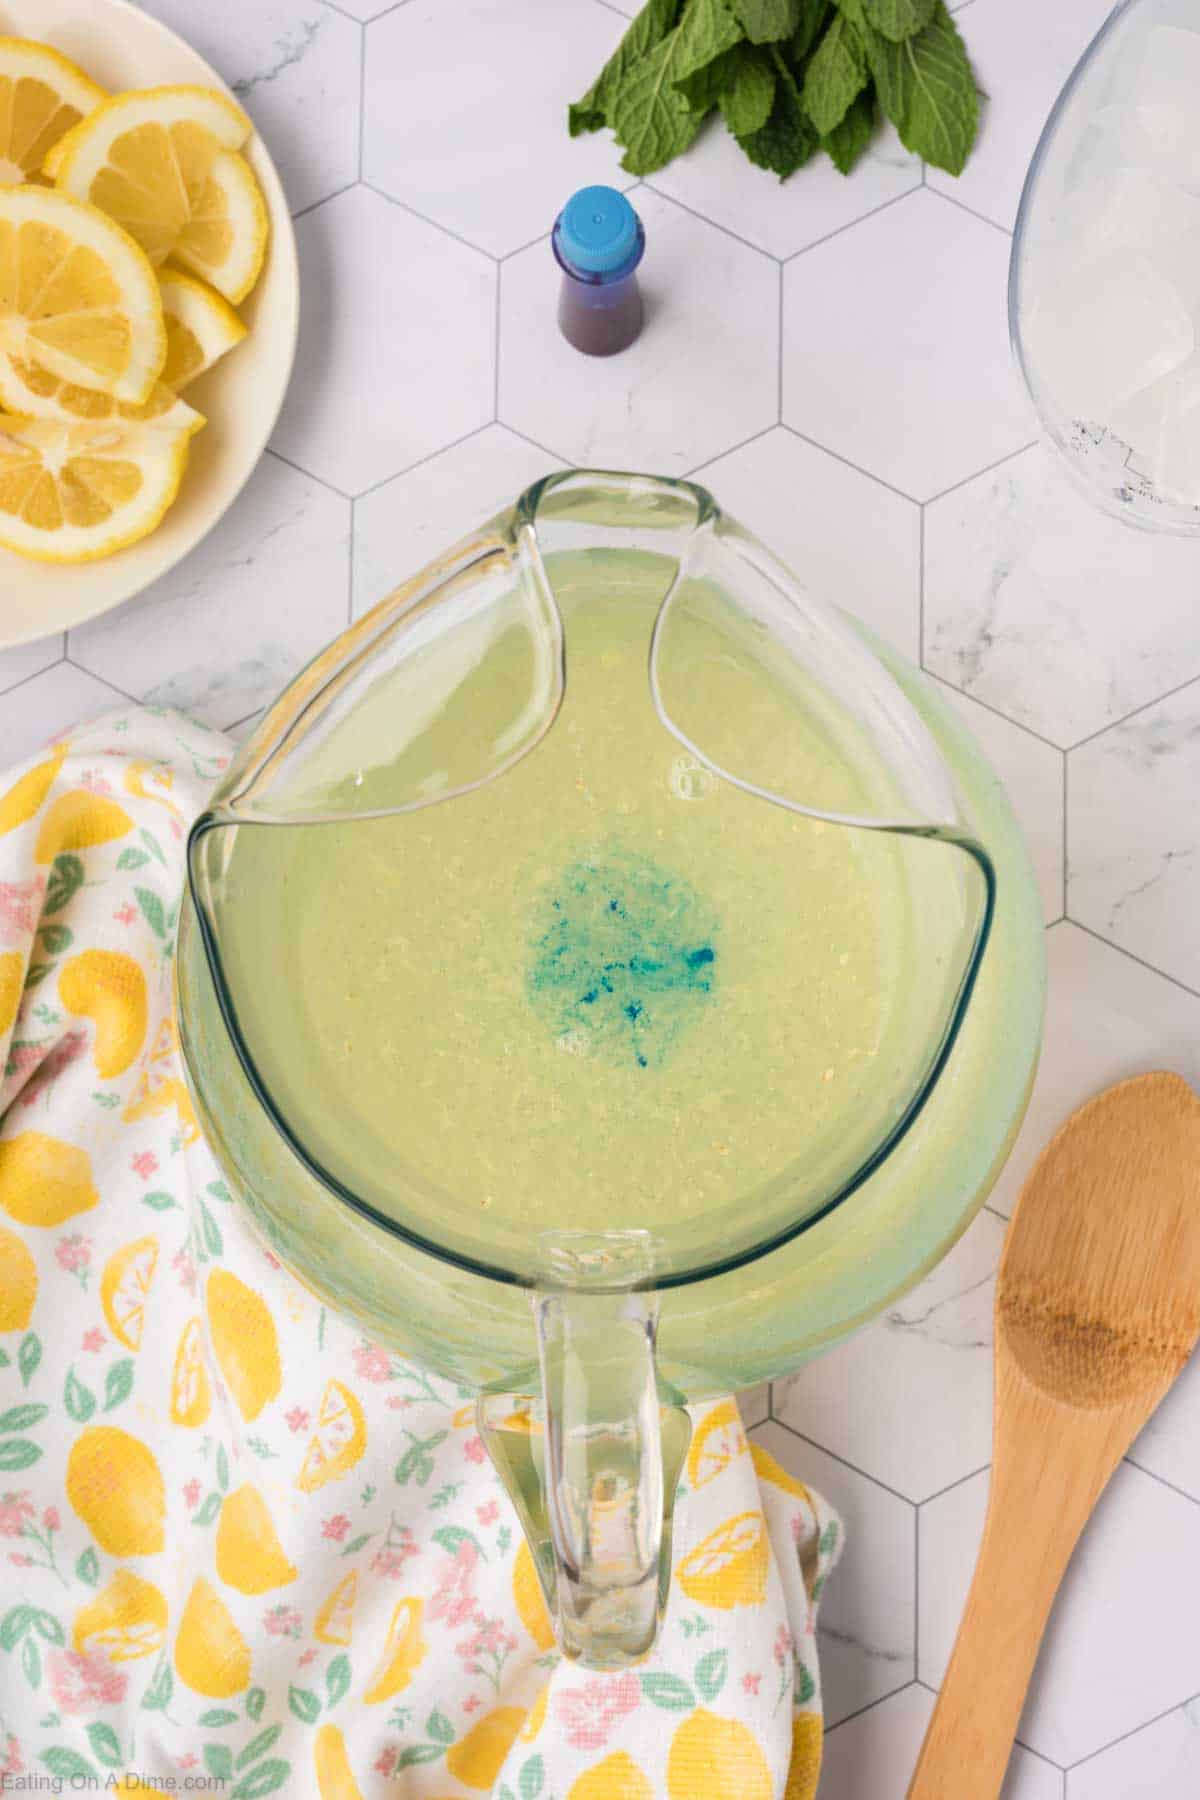 Dropping blue food coloring into the pitcher of lemonade